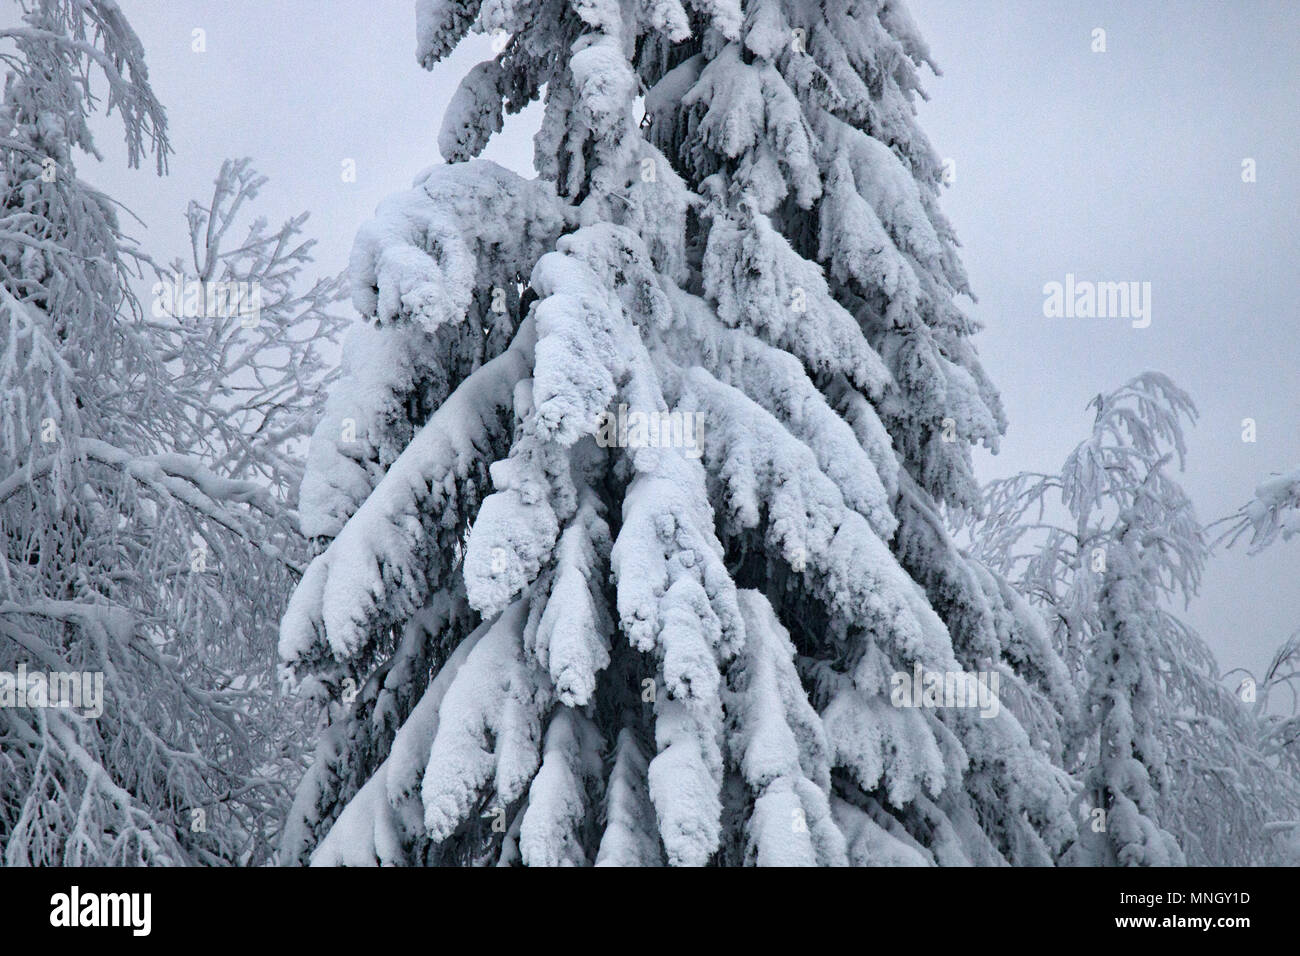 Siberian winter, snowy winter, frosty winter. Wood is filled with snow, snow-covered forest. Snow boss, snowcap on branches and tops of fir trees. Sib Stock Photo